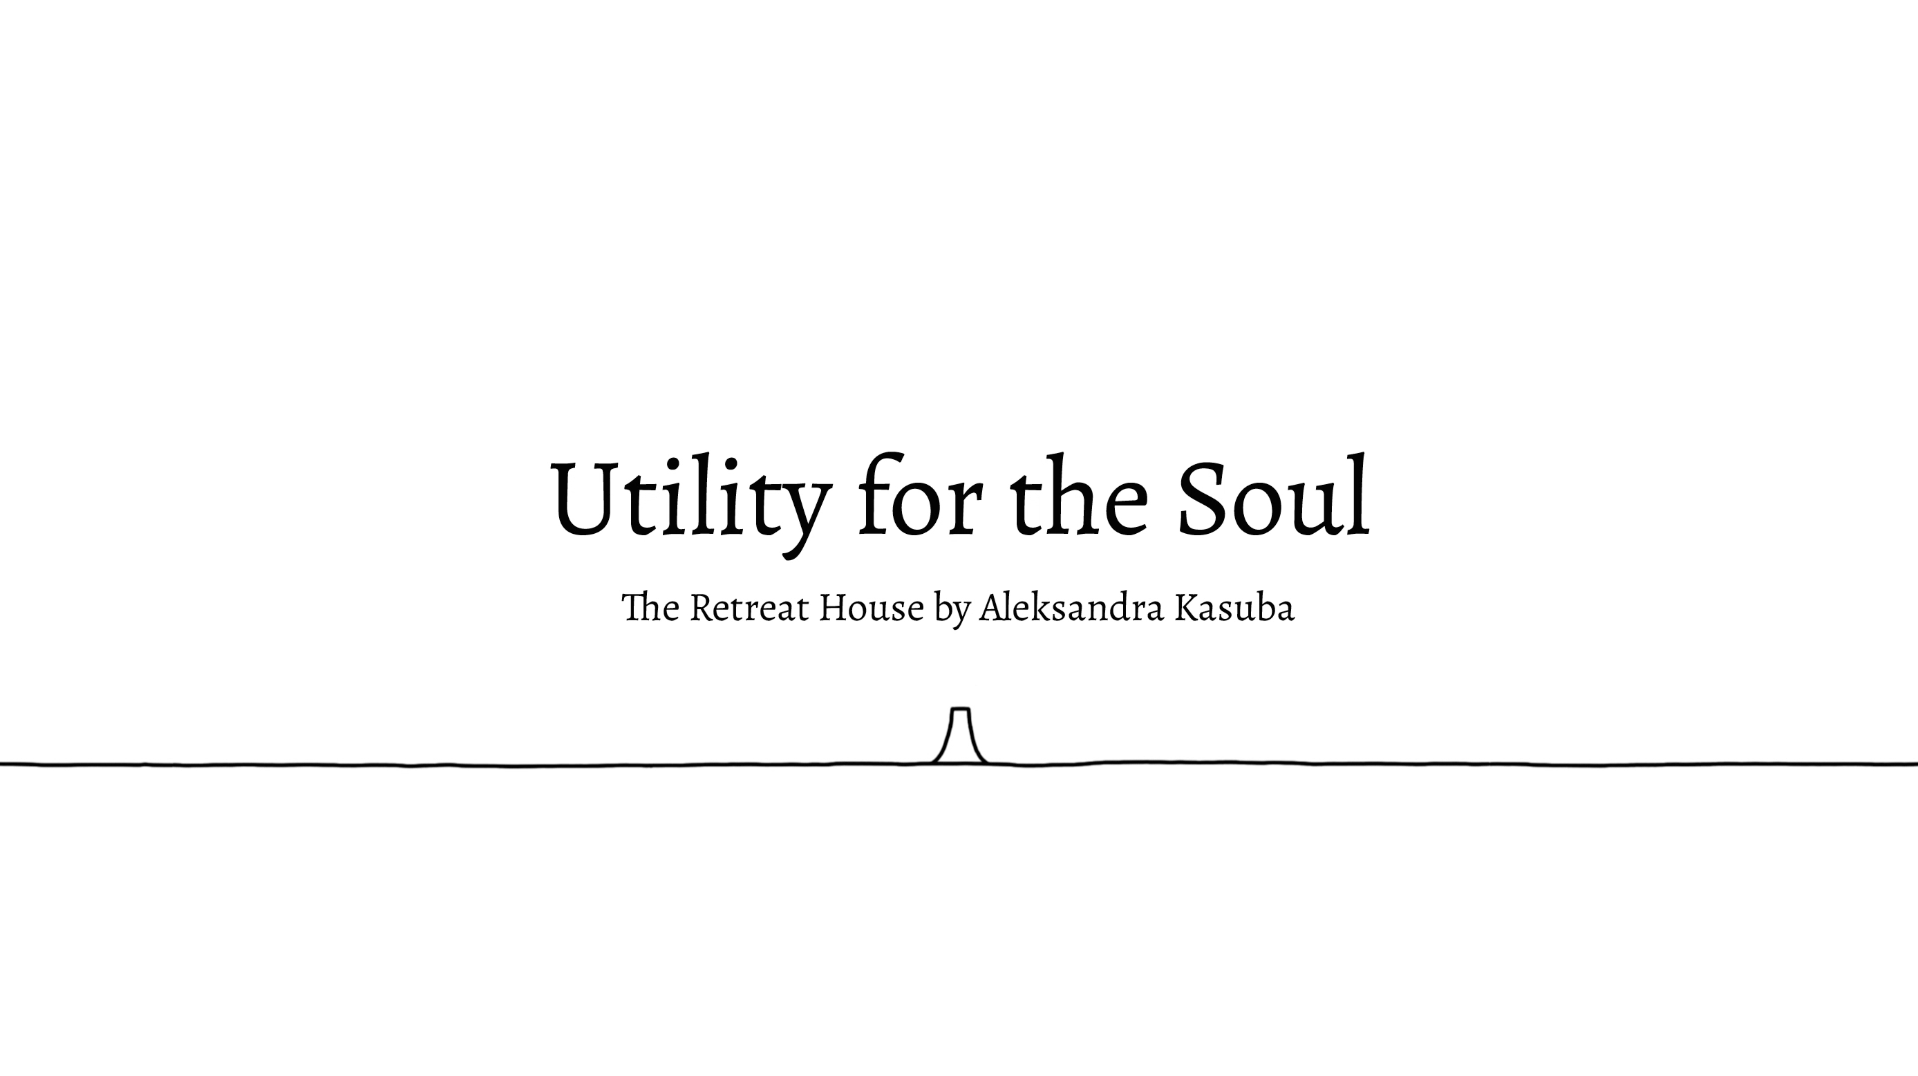 Utility for the Soul